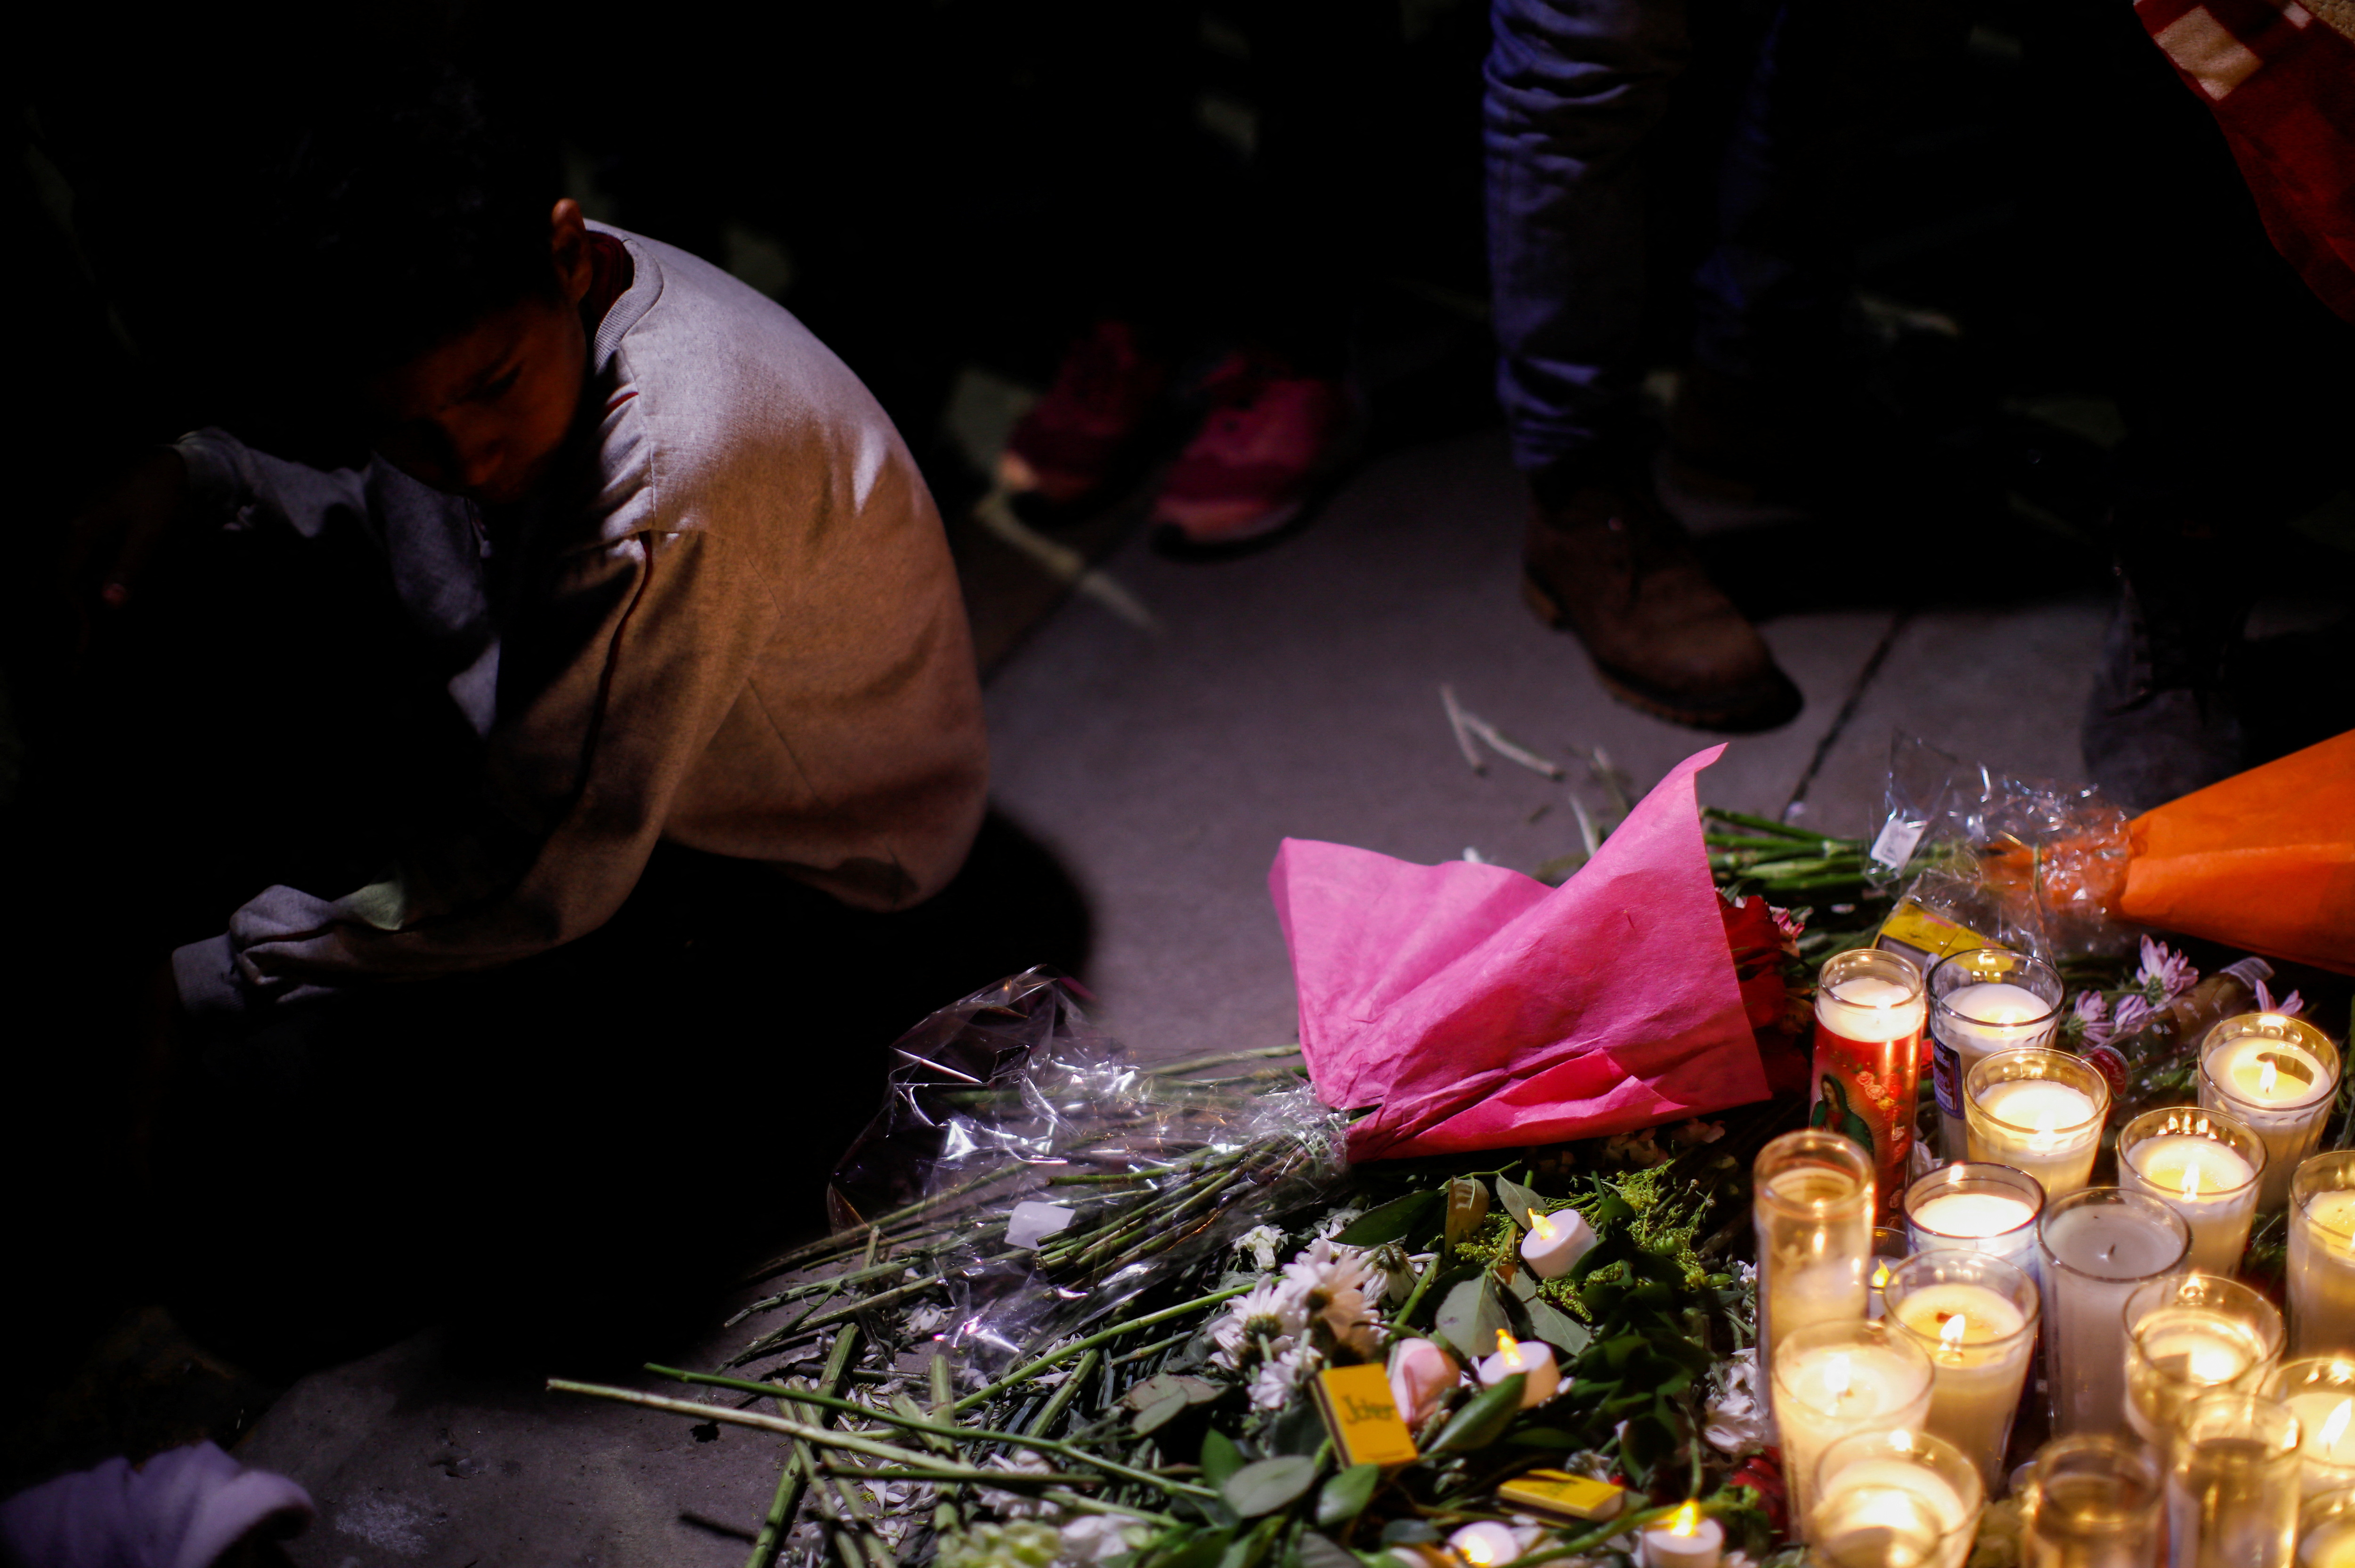 Vigil outside the office of the National Institute of Migration (INM) in Ciudad Juarez